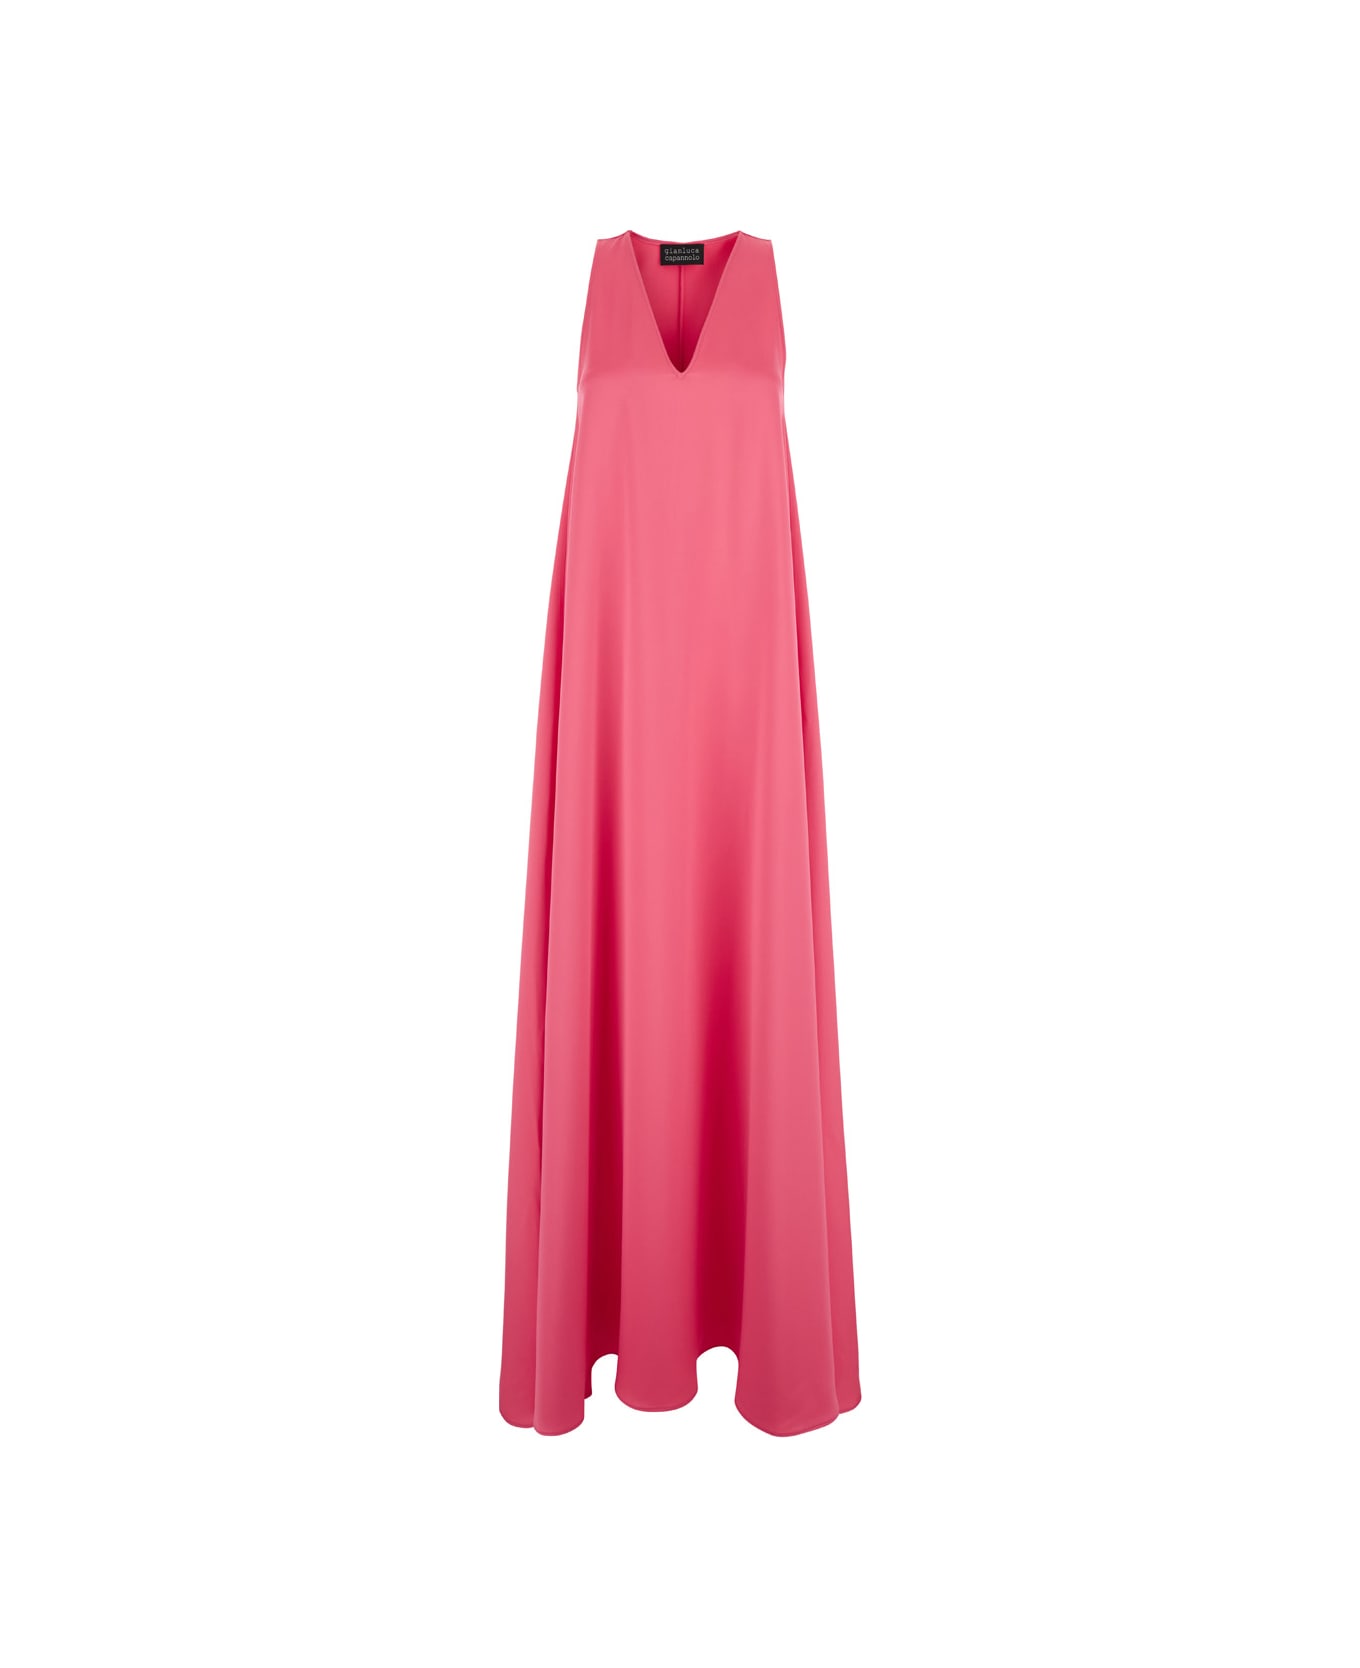 Gianluca Capannolo Pink Maxi Dress In Satin Woman - Pink